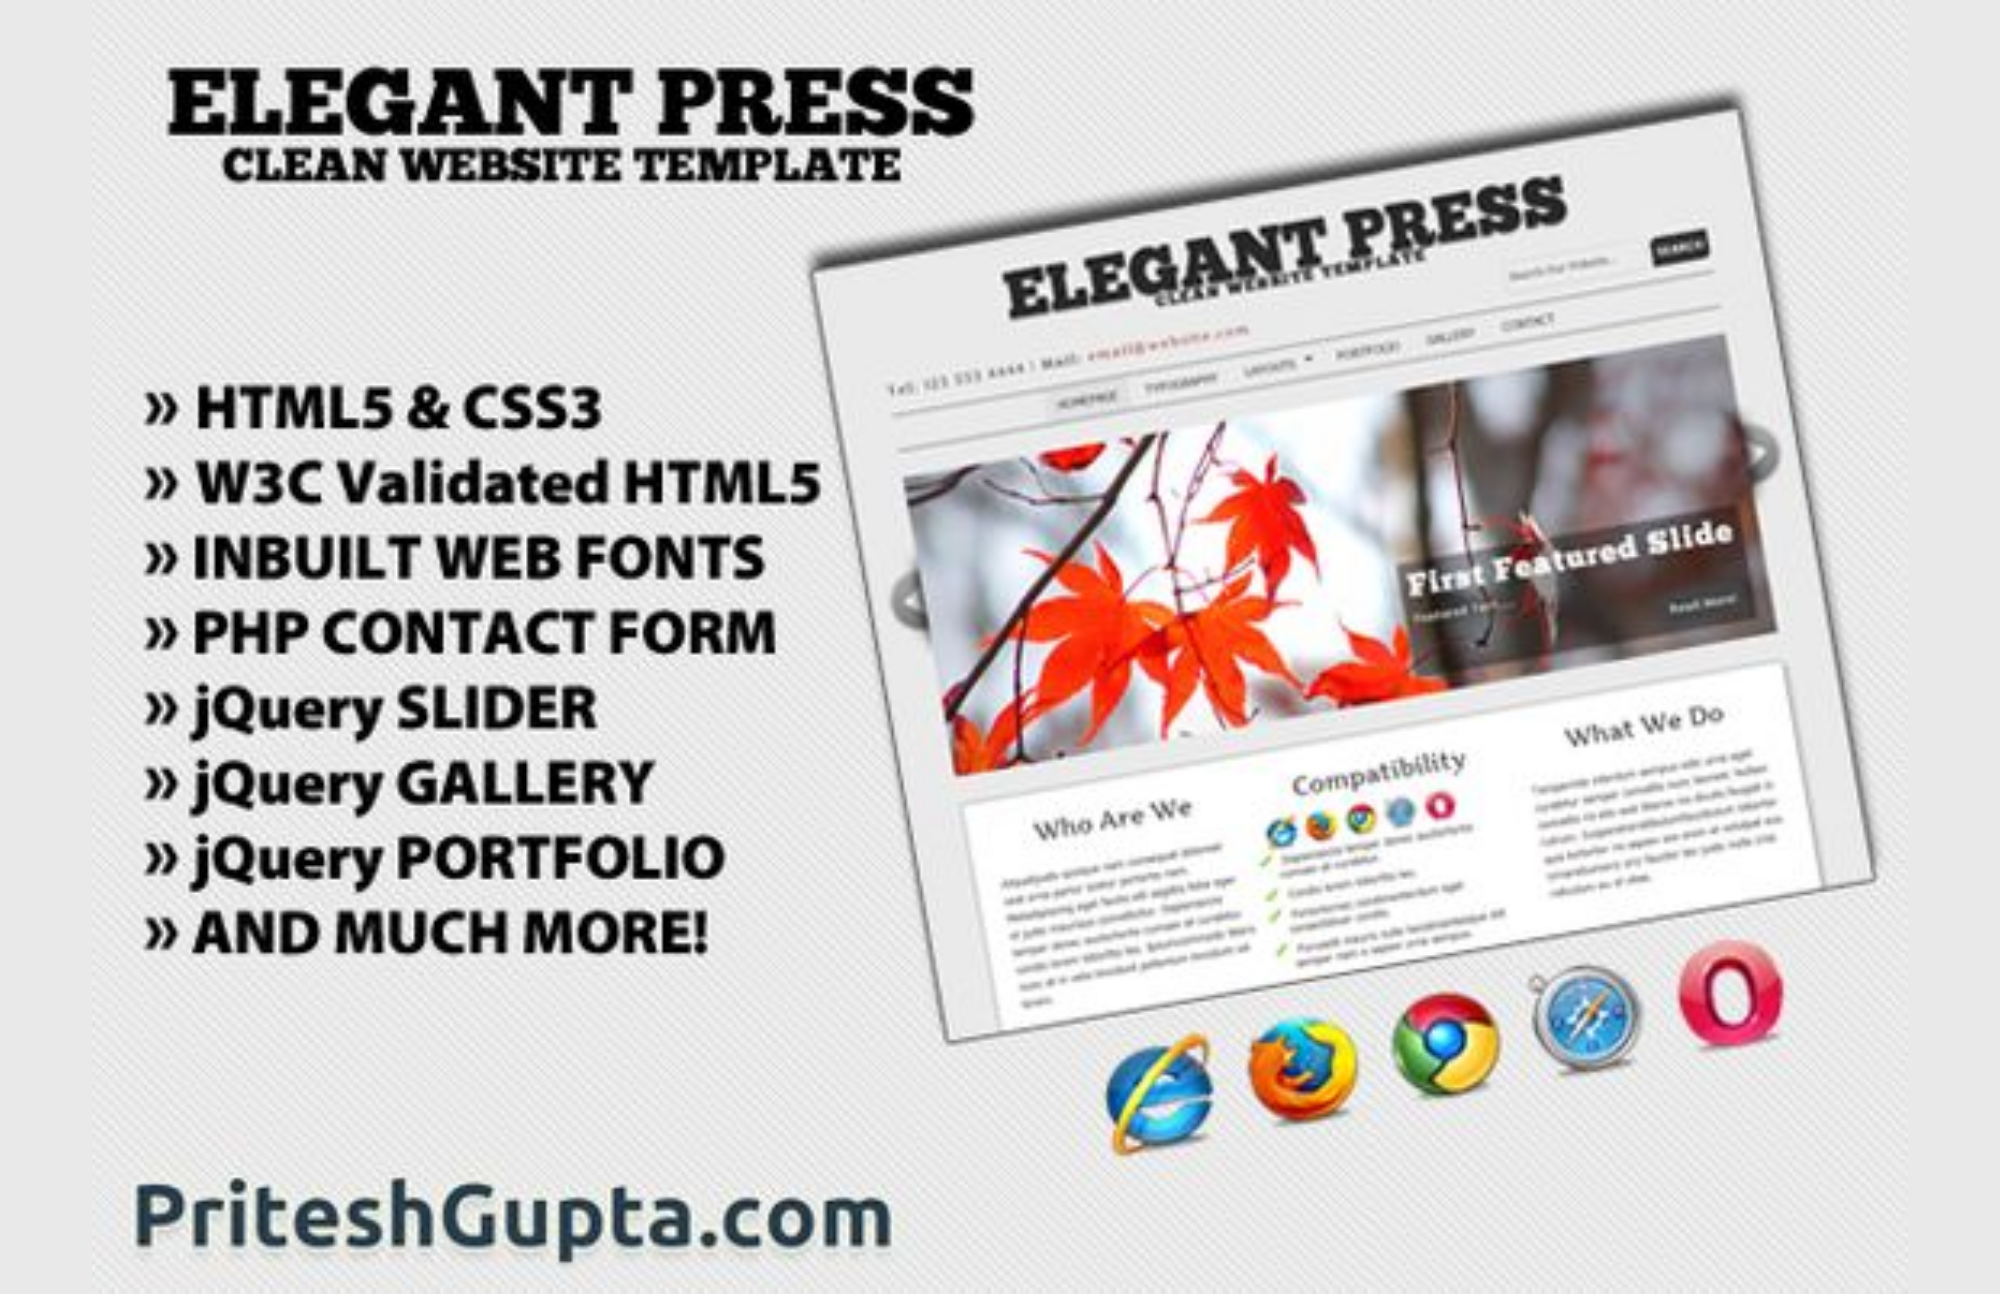 ElegantPress Html5 And Css3 Template -  Is It Worth The Investment?